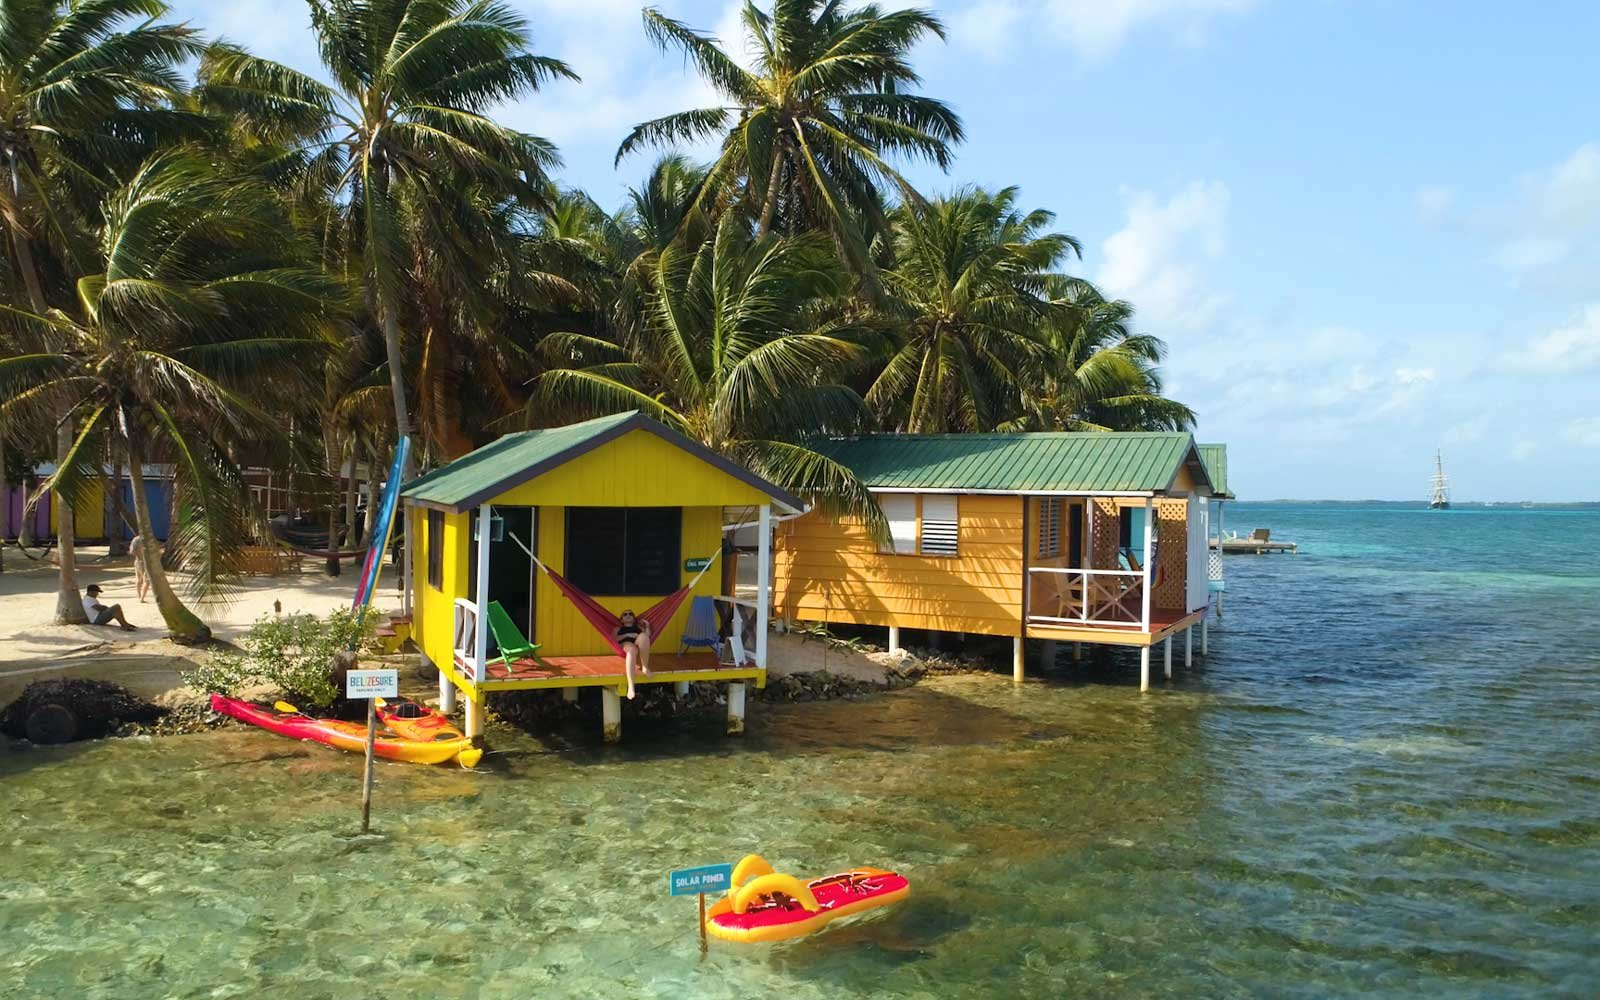 a yellow and orange house on stilts in water with palm trees